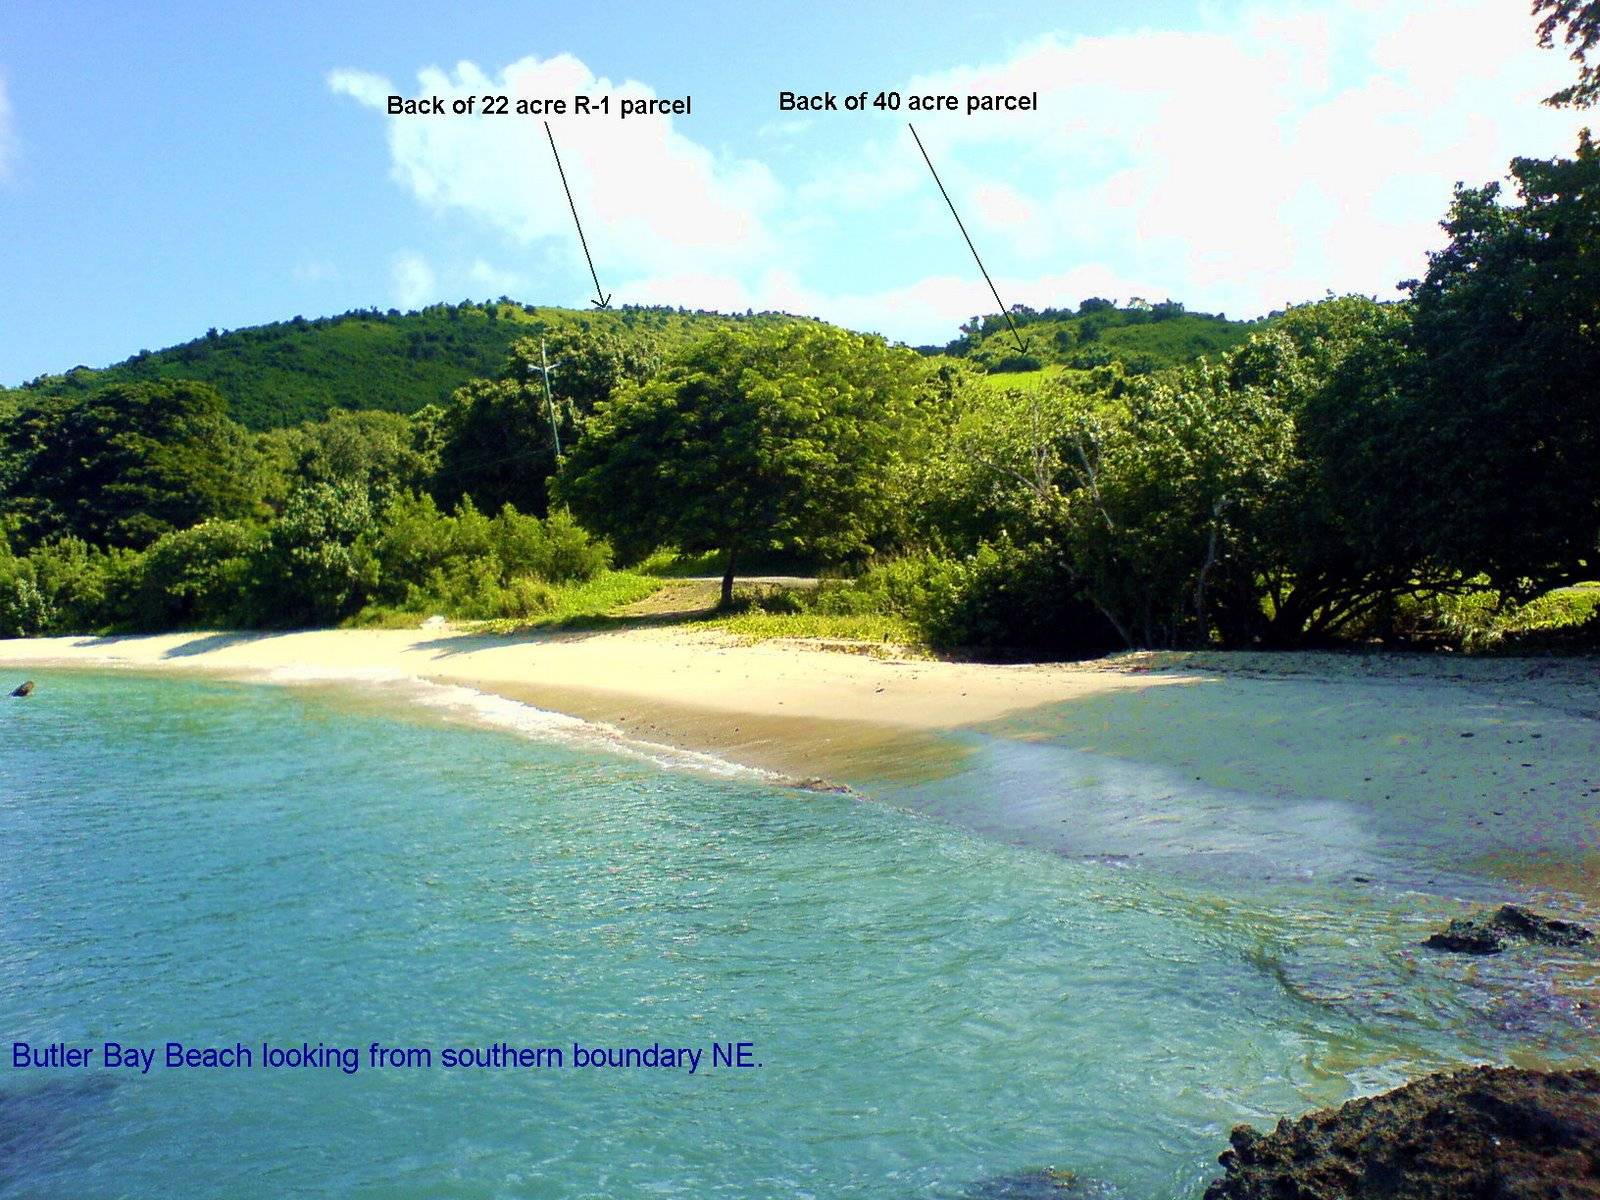 St Croix - US Virgin Island Beach Front Hotel/Casino/Condos/Villa Development Site for Sale!  Additional land available! Amazing Views!